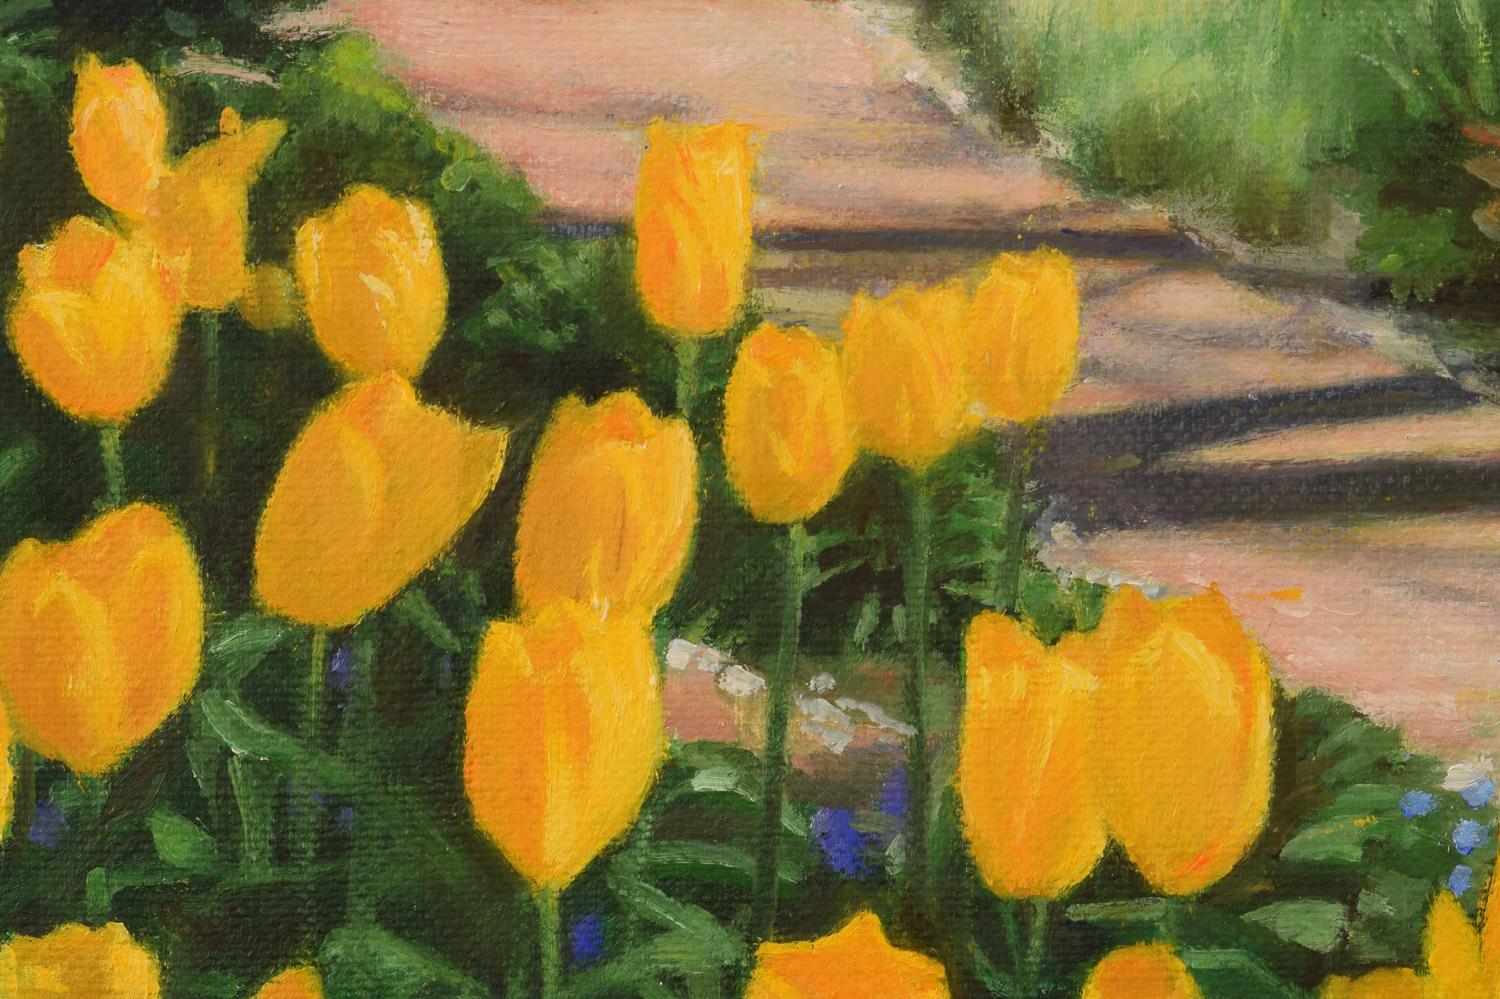 <p>Artist Comments<br />Pure, bright tulips frame a pathway lit with filtered sunshine. Artist Nick Savides depicts a peaceful spring morning at Jefferson Market Garden in Greenwich Village in New York. He captures the warm mood with small detail